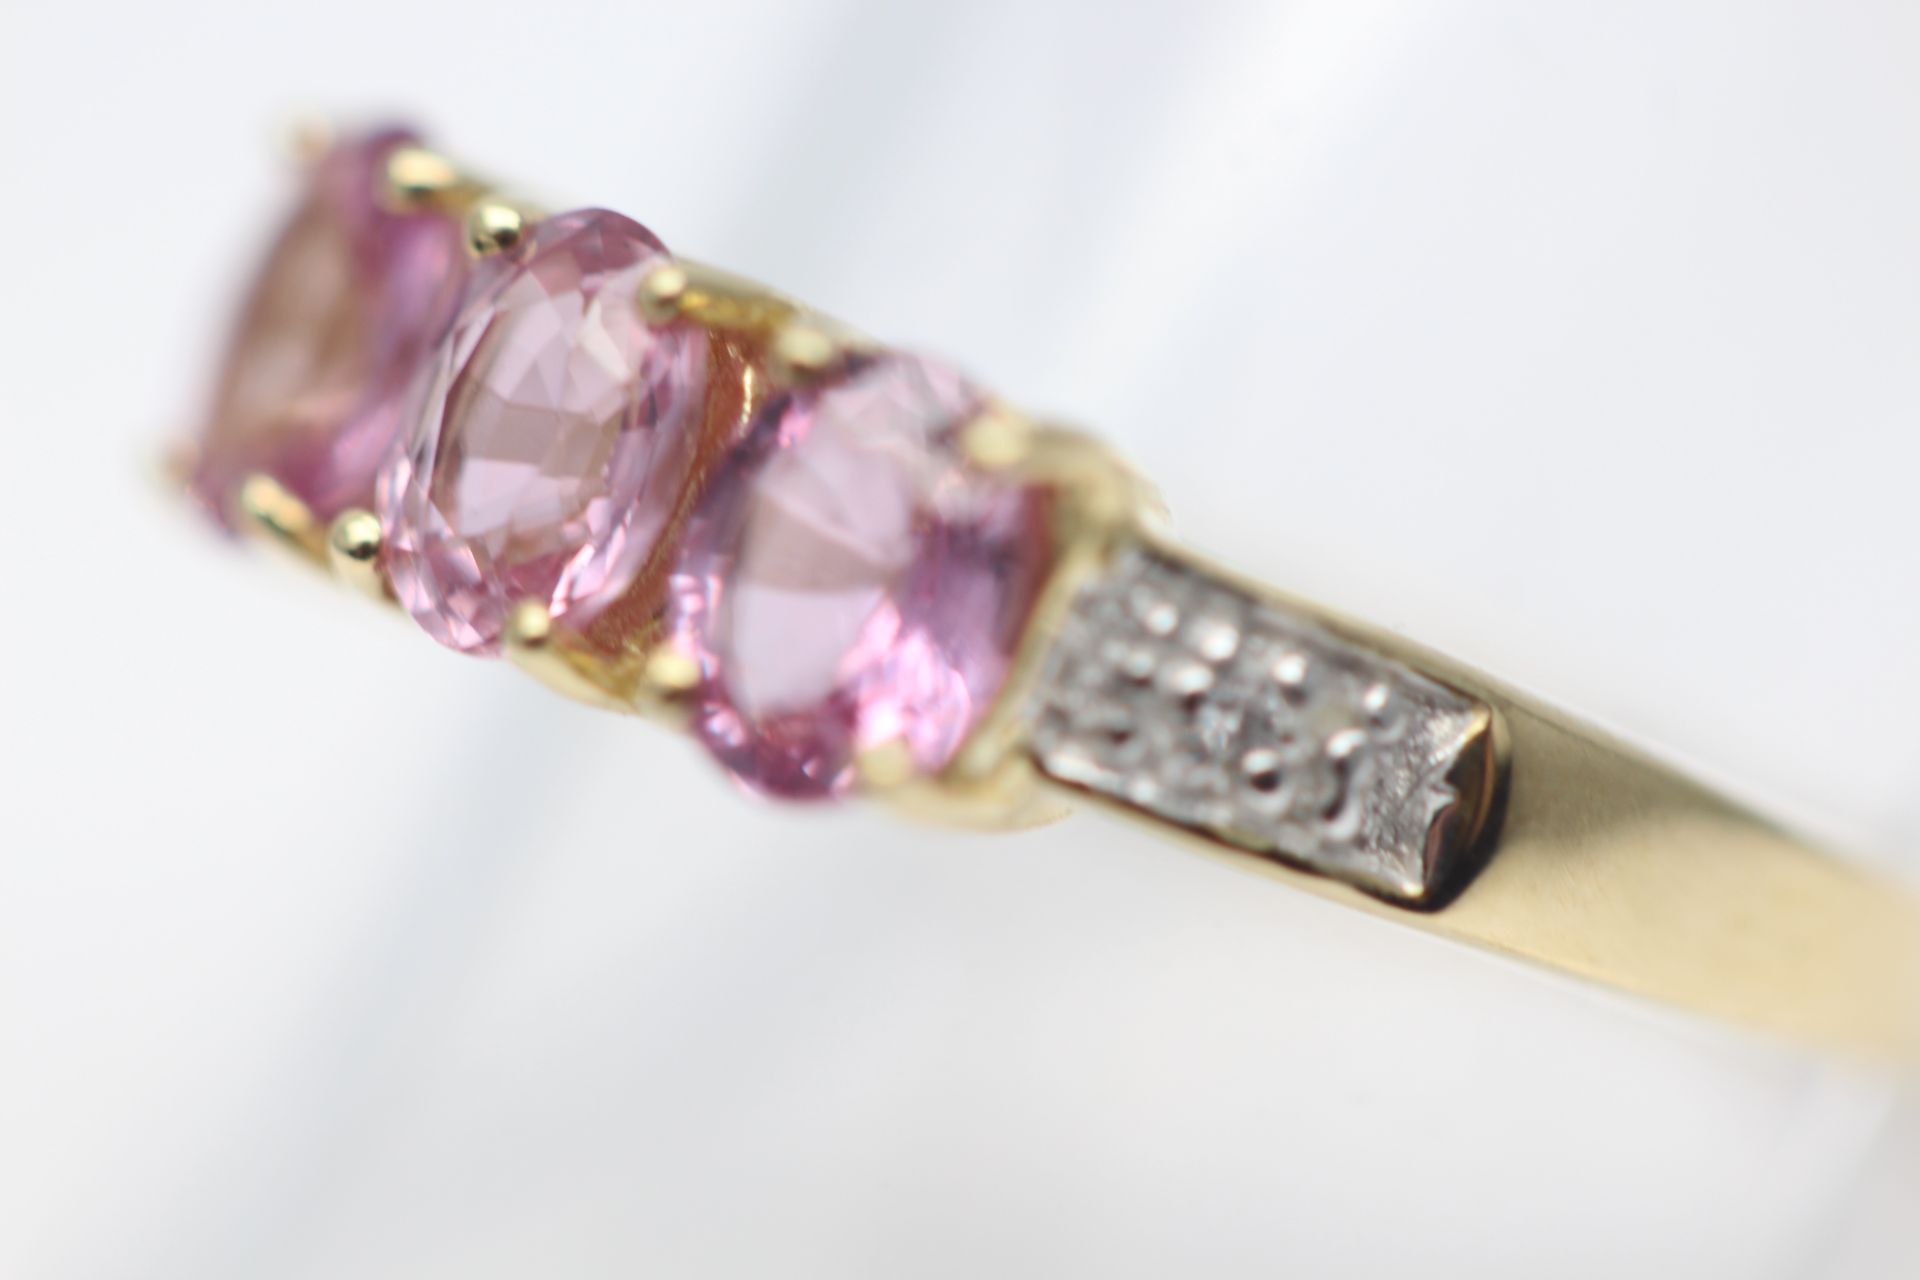 SOLID YELLOW GOLD LADIES RING SET WITH 1.50 CARATS OF NATURAL PINK SAPPIRES AND DIAMONDS (PV-JH) - Image 2 of 2